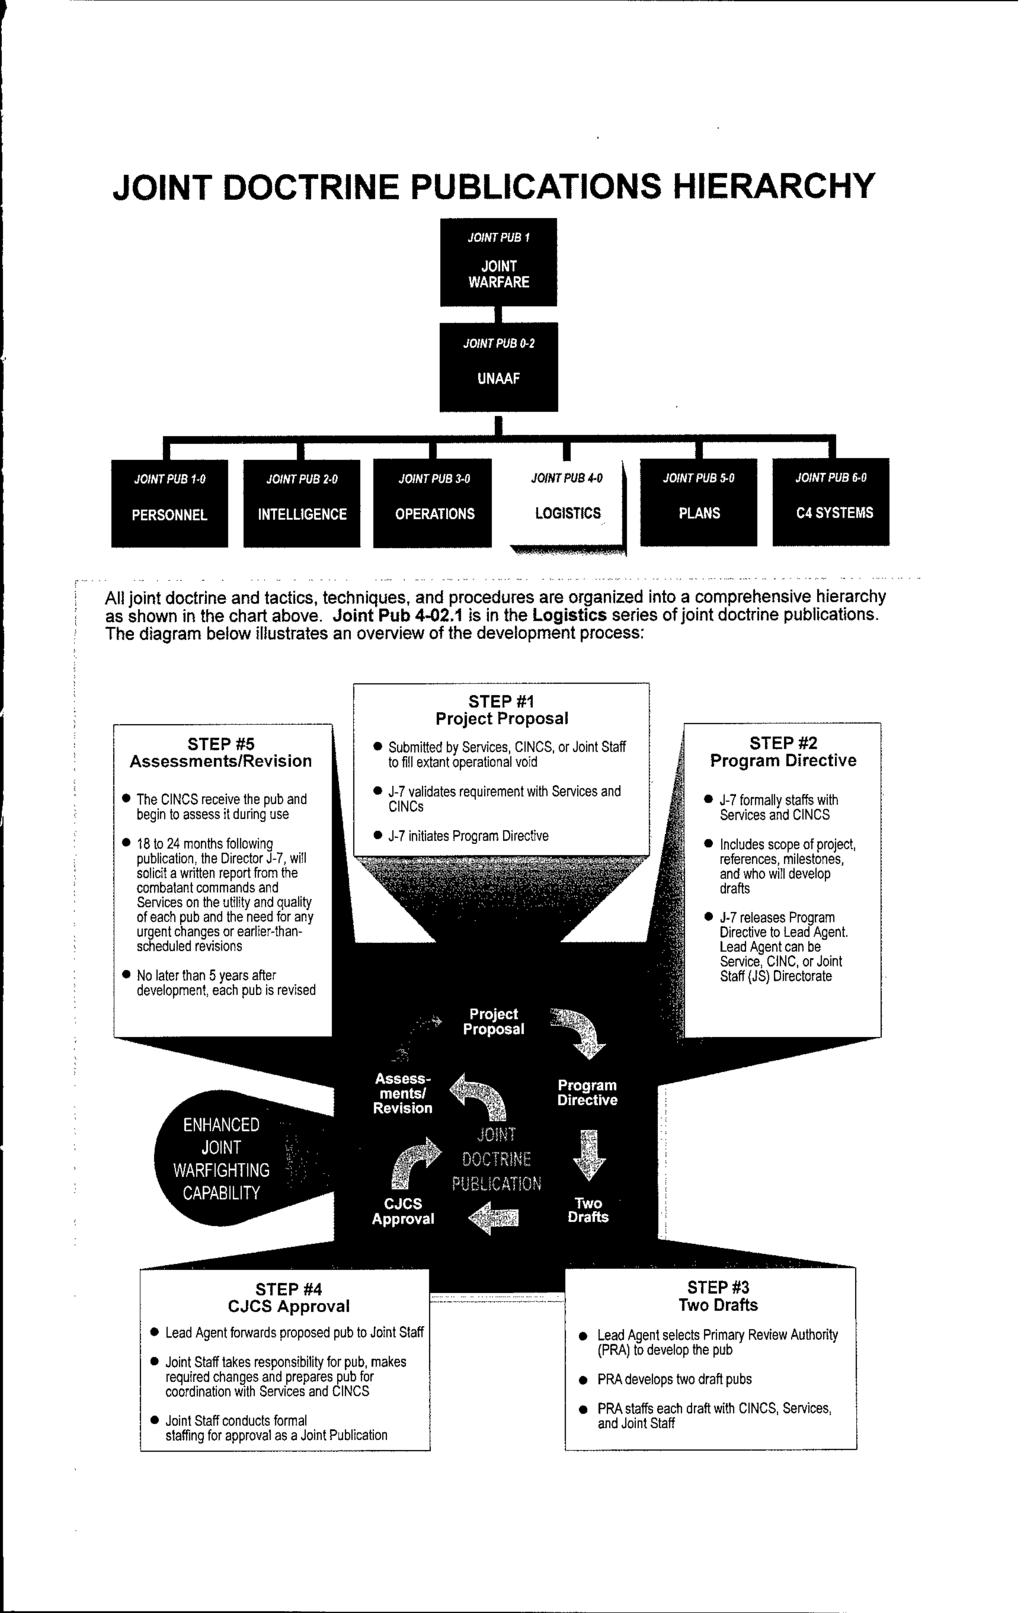 JOINT DOCTRINE PUBLICATIONS HIERARCHY JOINT WARFARE All joint doctrine and tactics, techniques, and procedures are organized into a comprehensive hierarchy as shown in the chart above. Joint Pub 4-02.